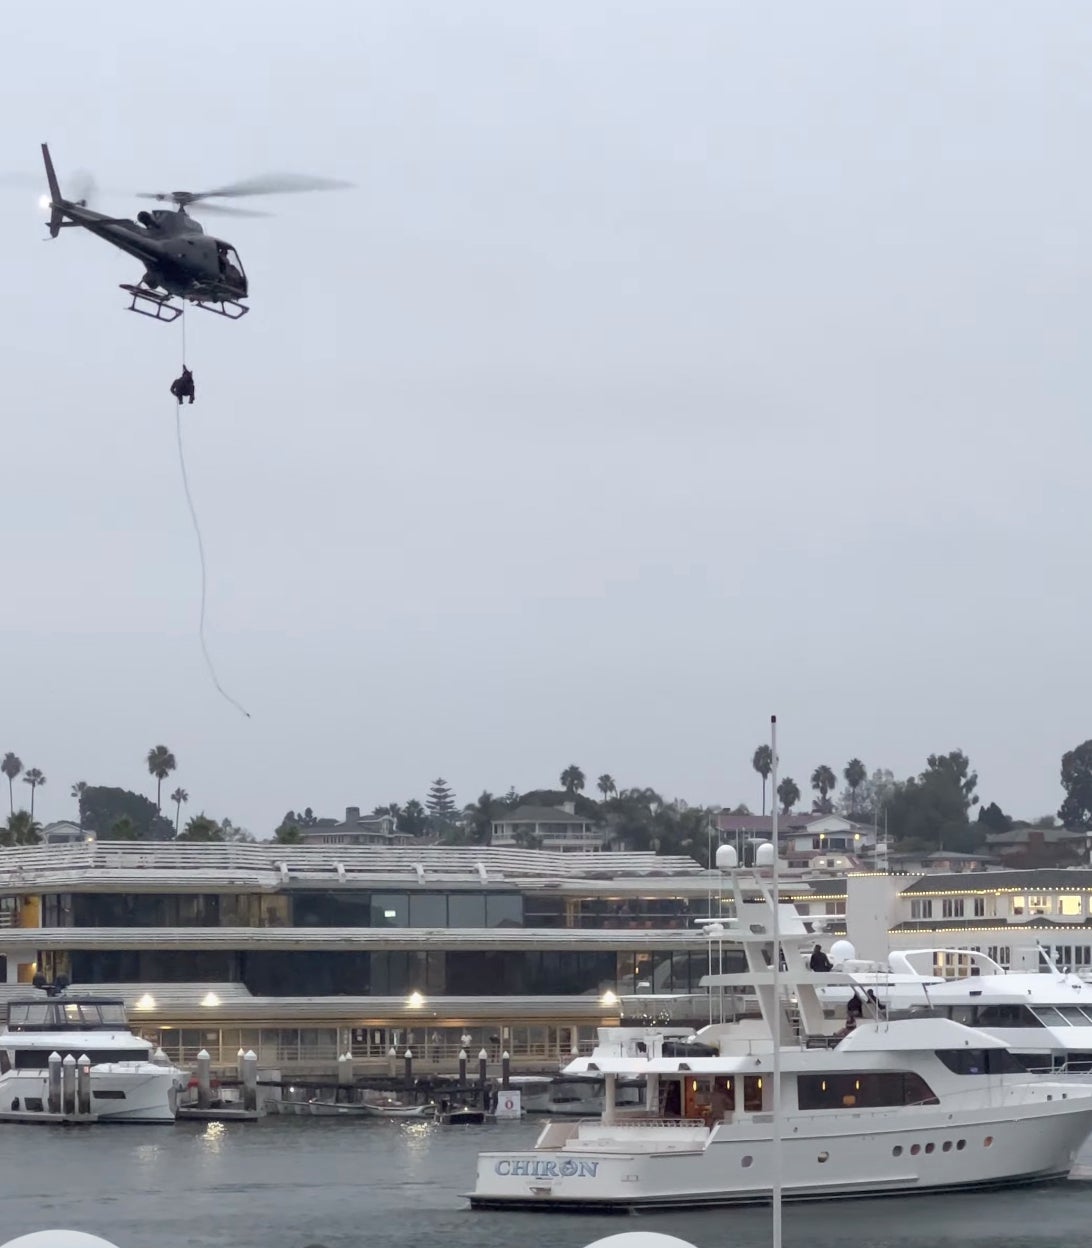 Helicopter-Borne Commandos ‘Raid’ Yacht In Newport Beach Harbor For Charity